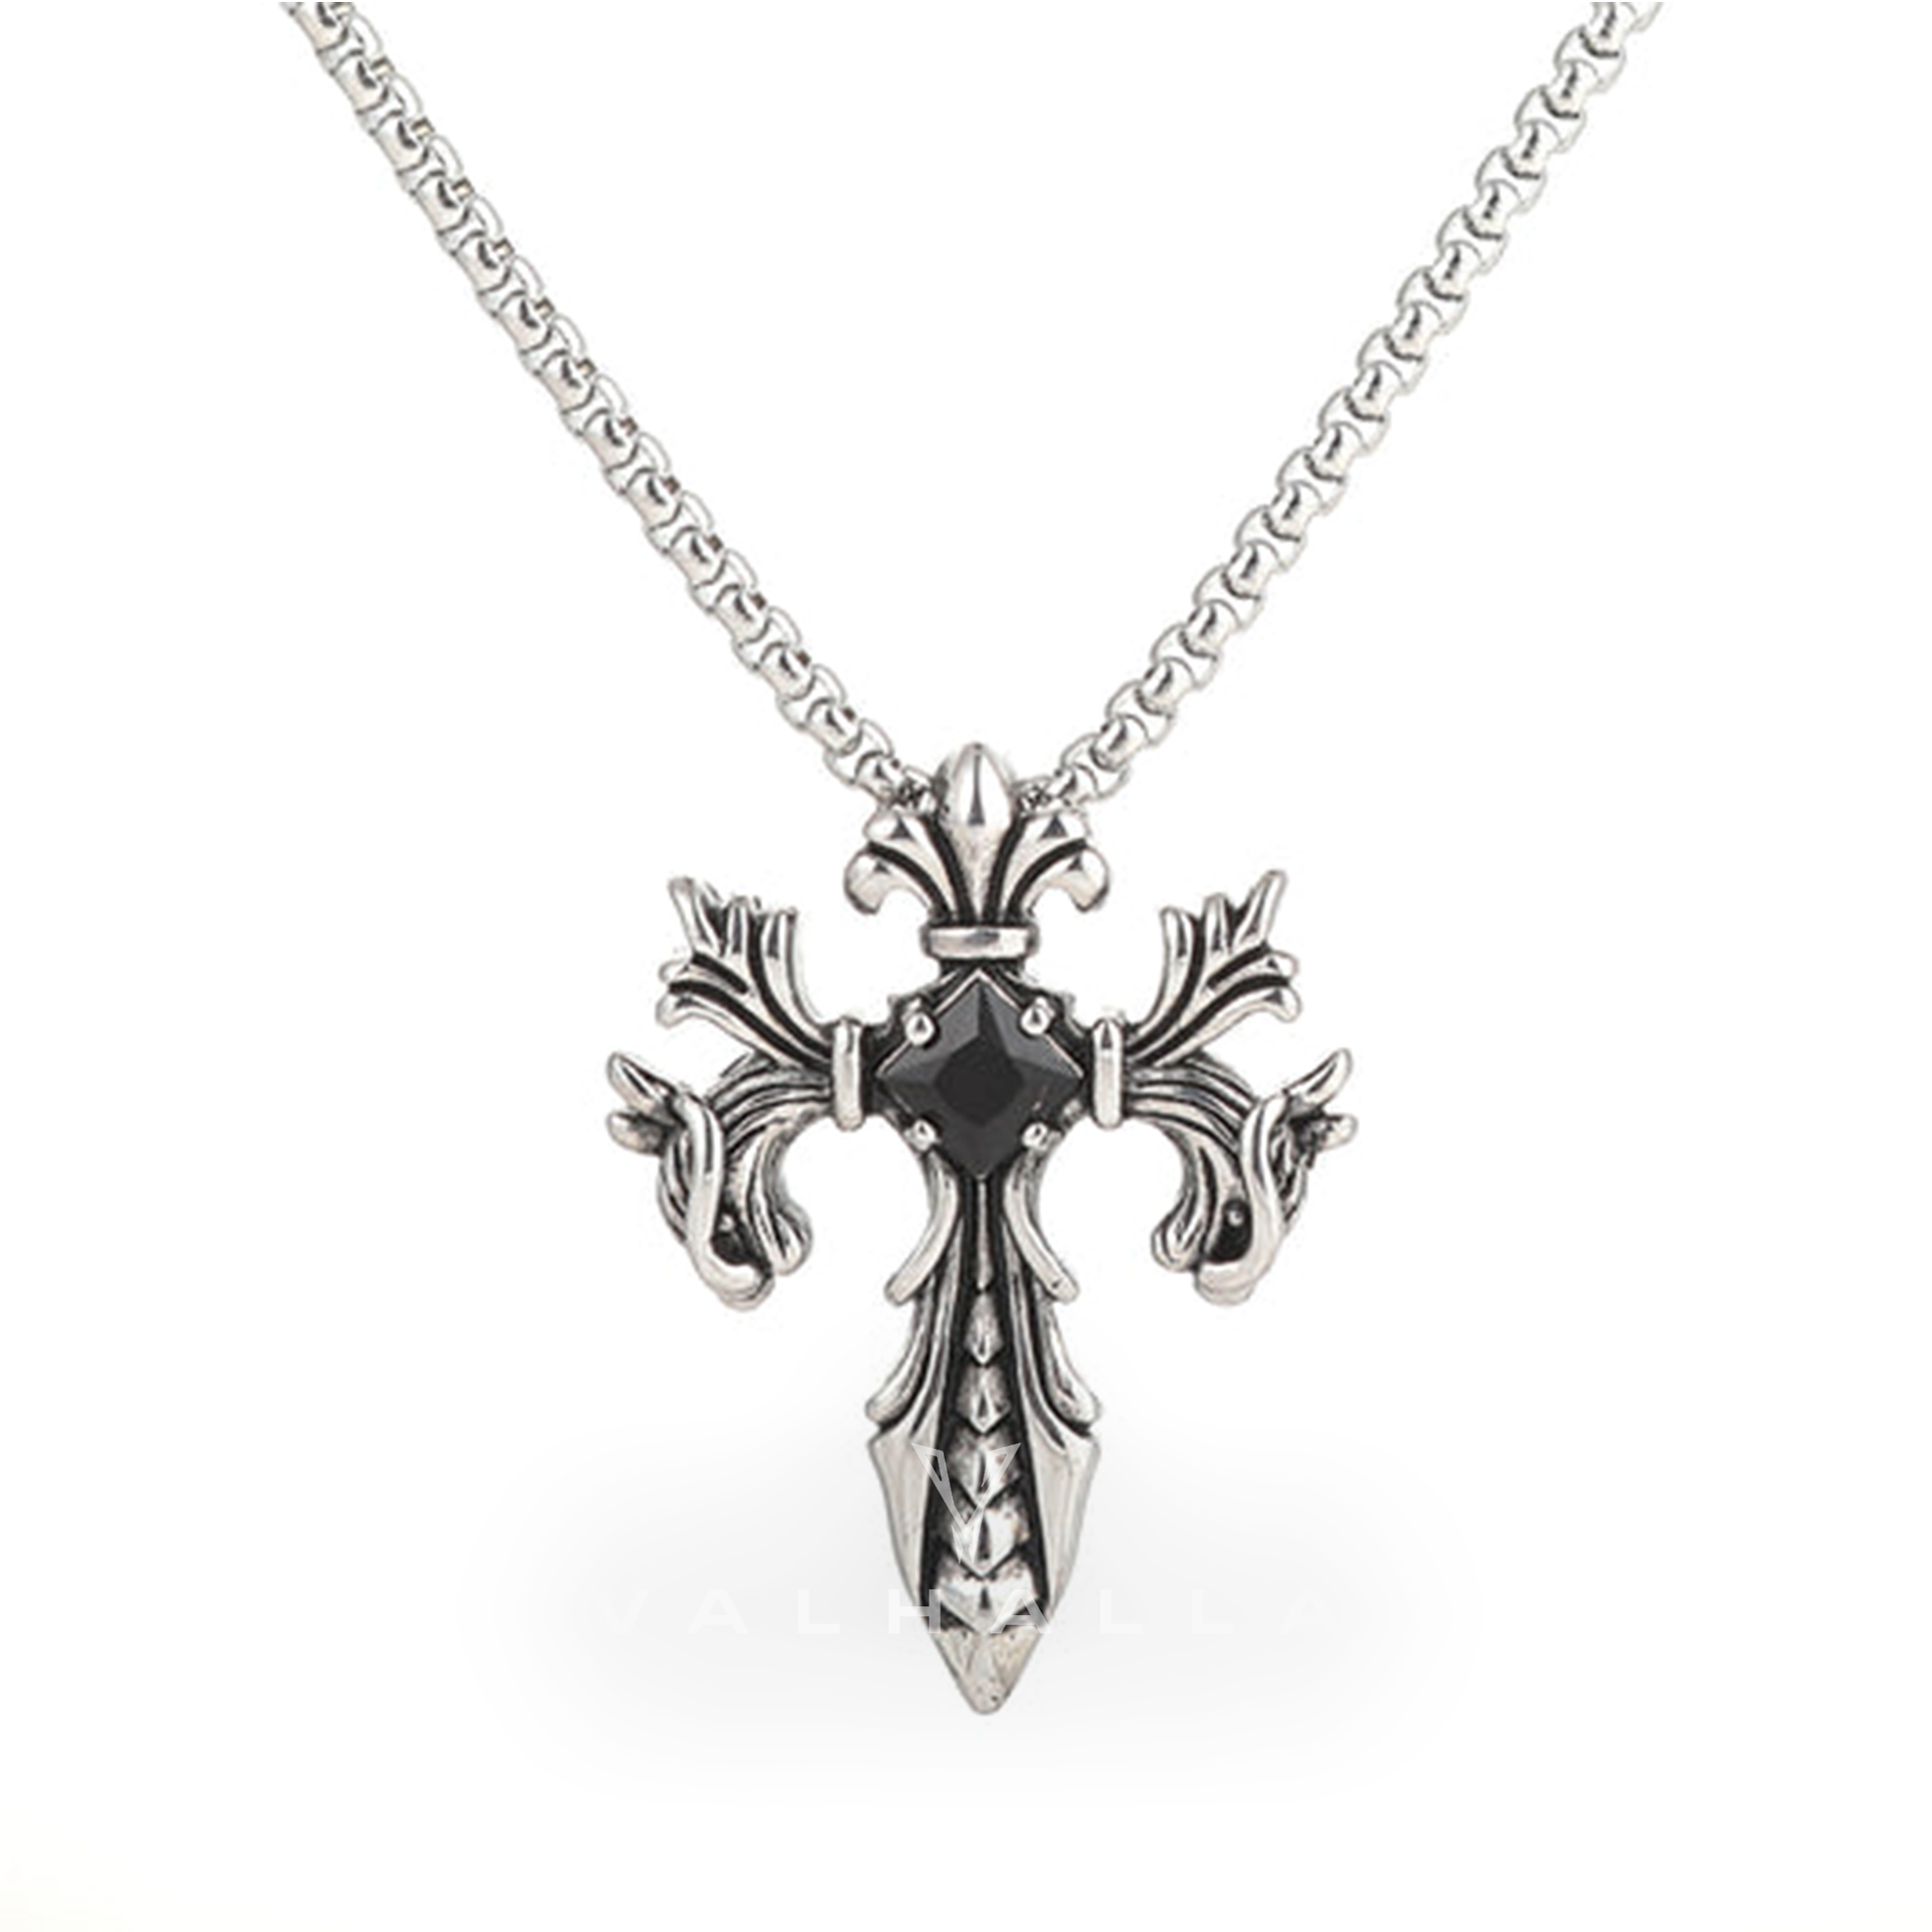 Double Dragon Cross Stainless Steel Pendant & Chain